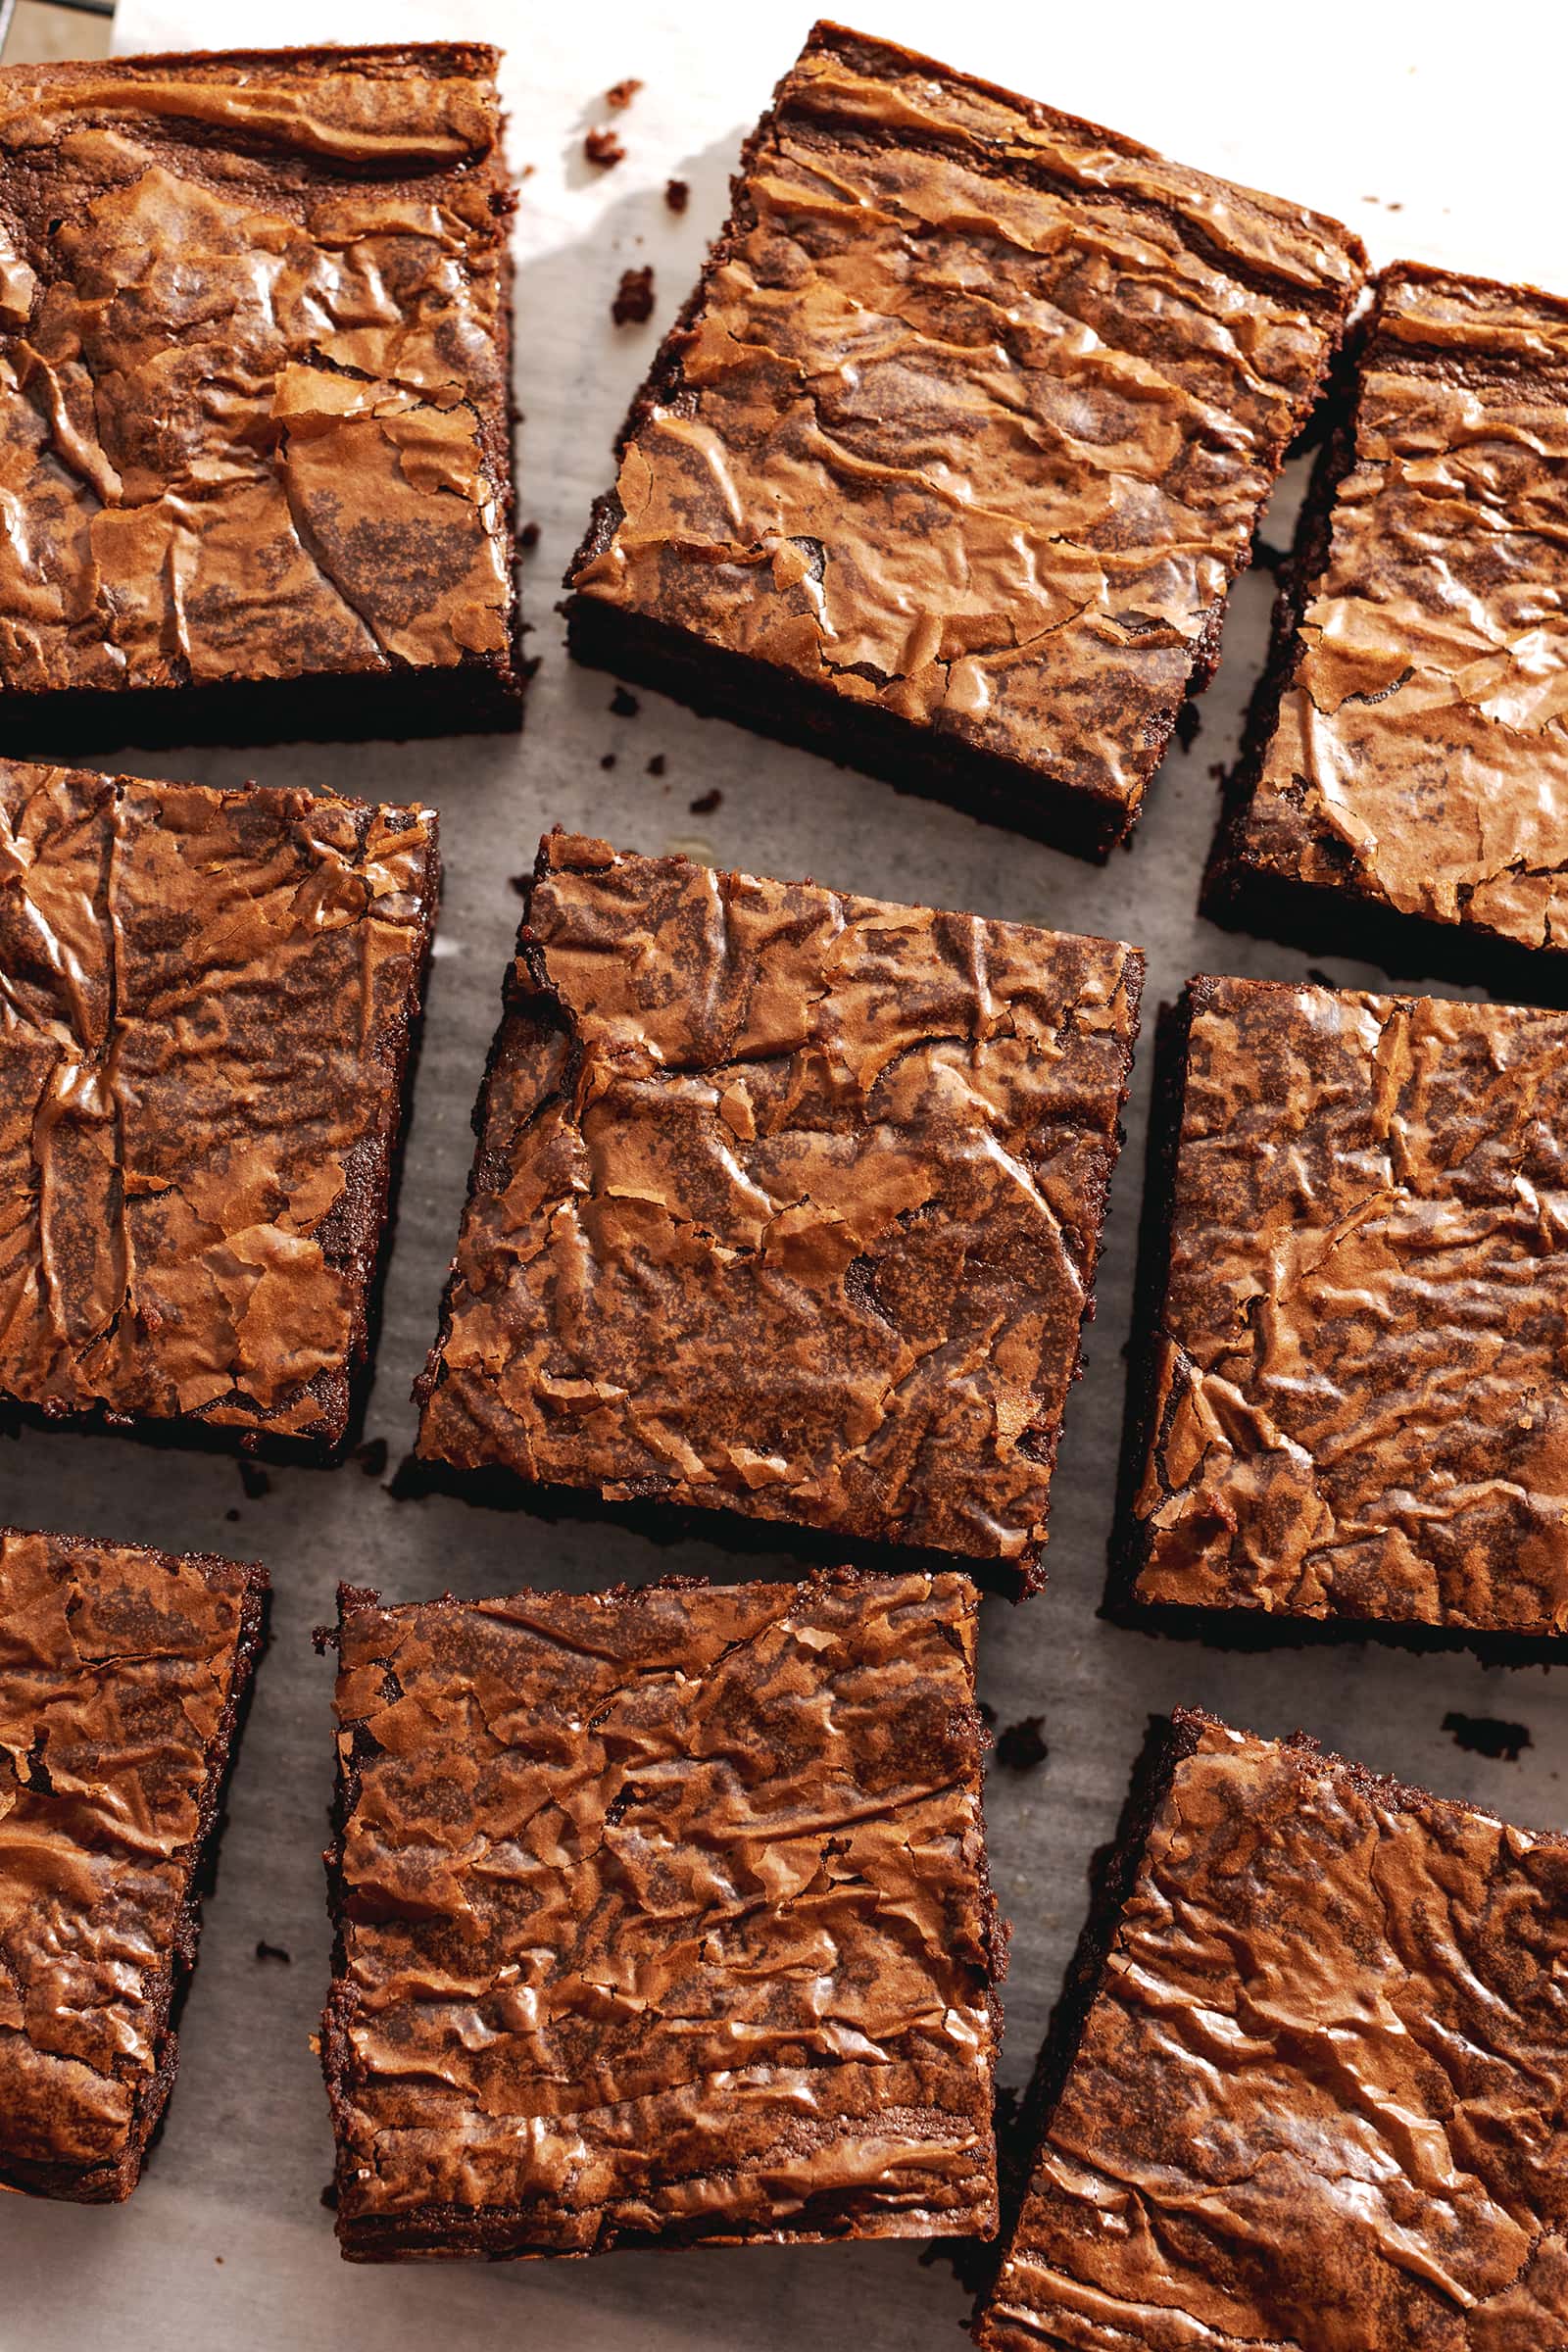 Squares of miso brownies with crackly tops scattered on parchment paper.